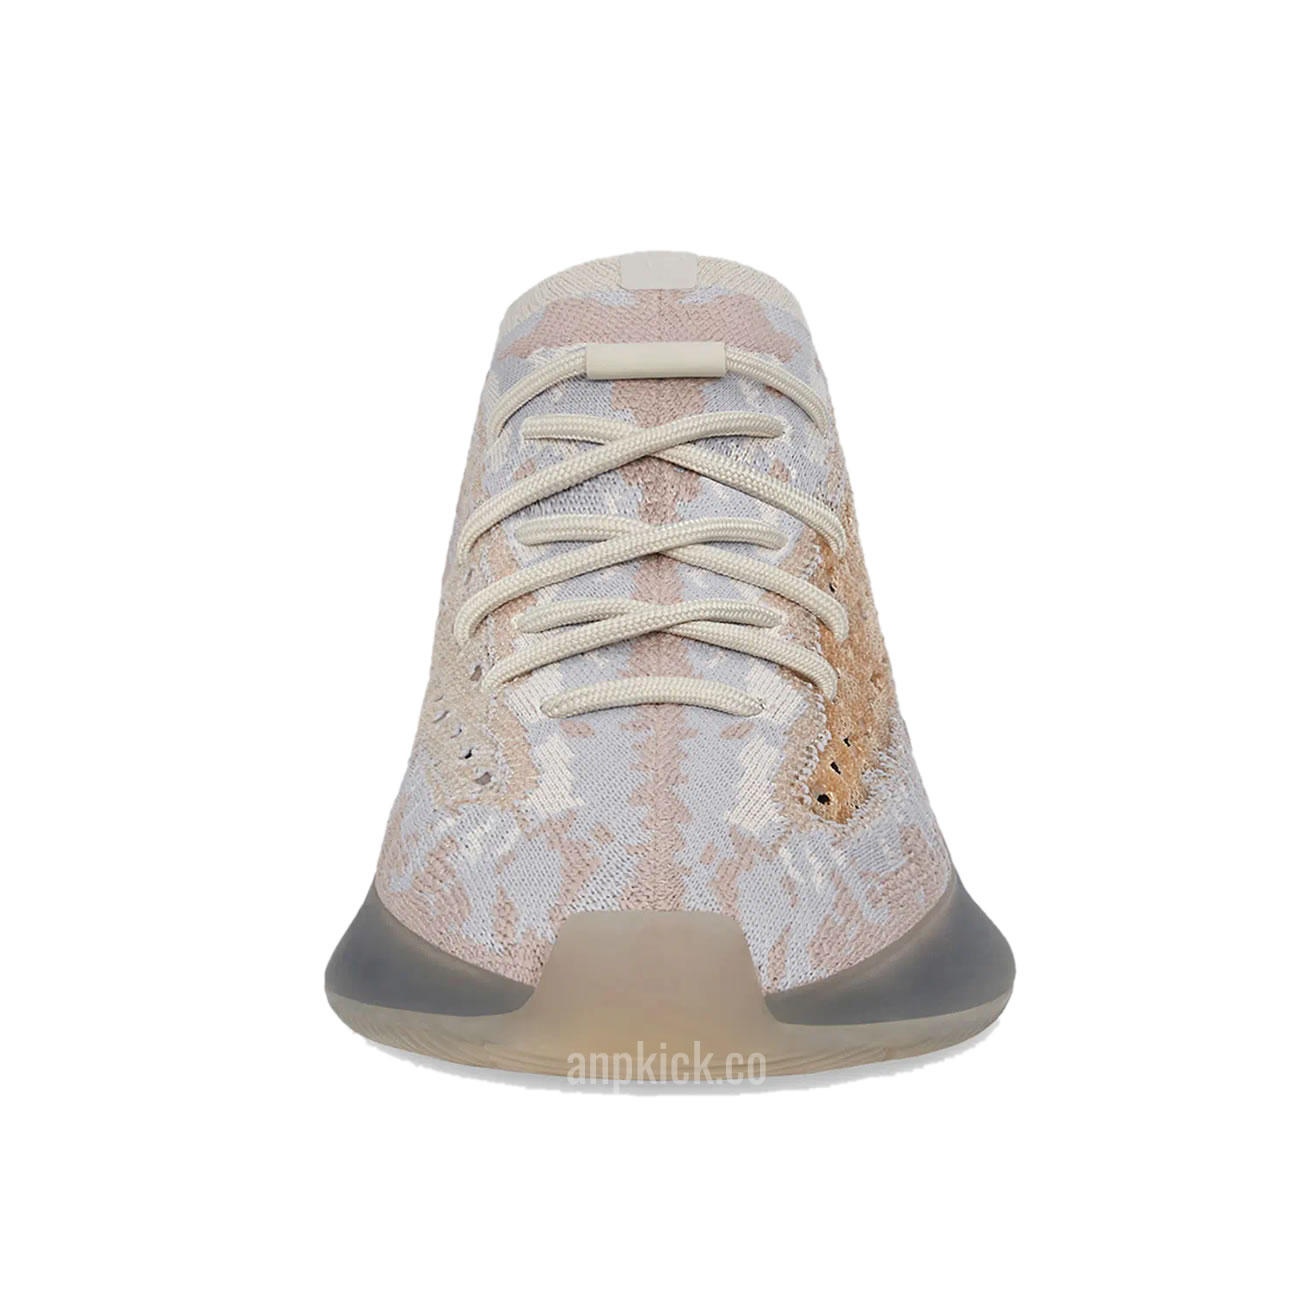 Adidas Yeezy Boost 380 Pepper Non Reflective Fz1269 New Release Date For Sale (3) - newkick.org